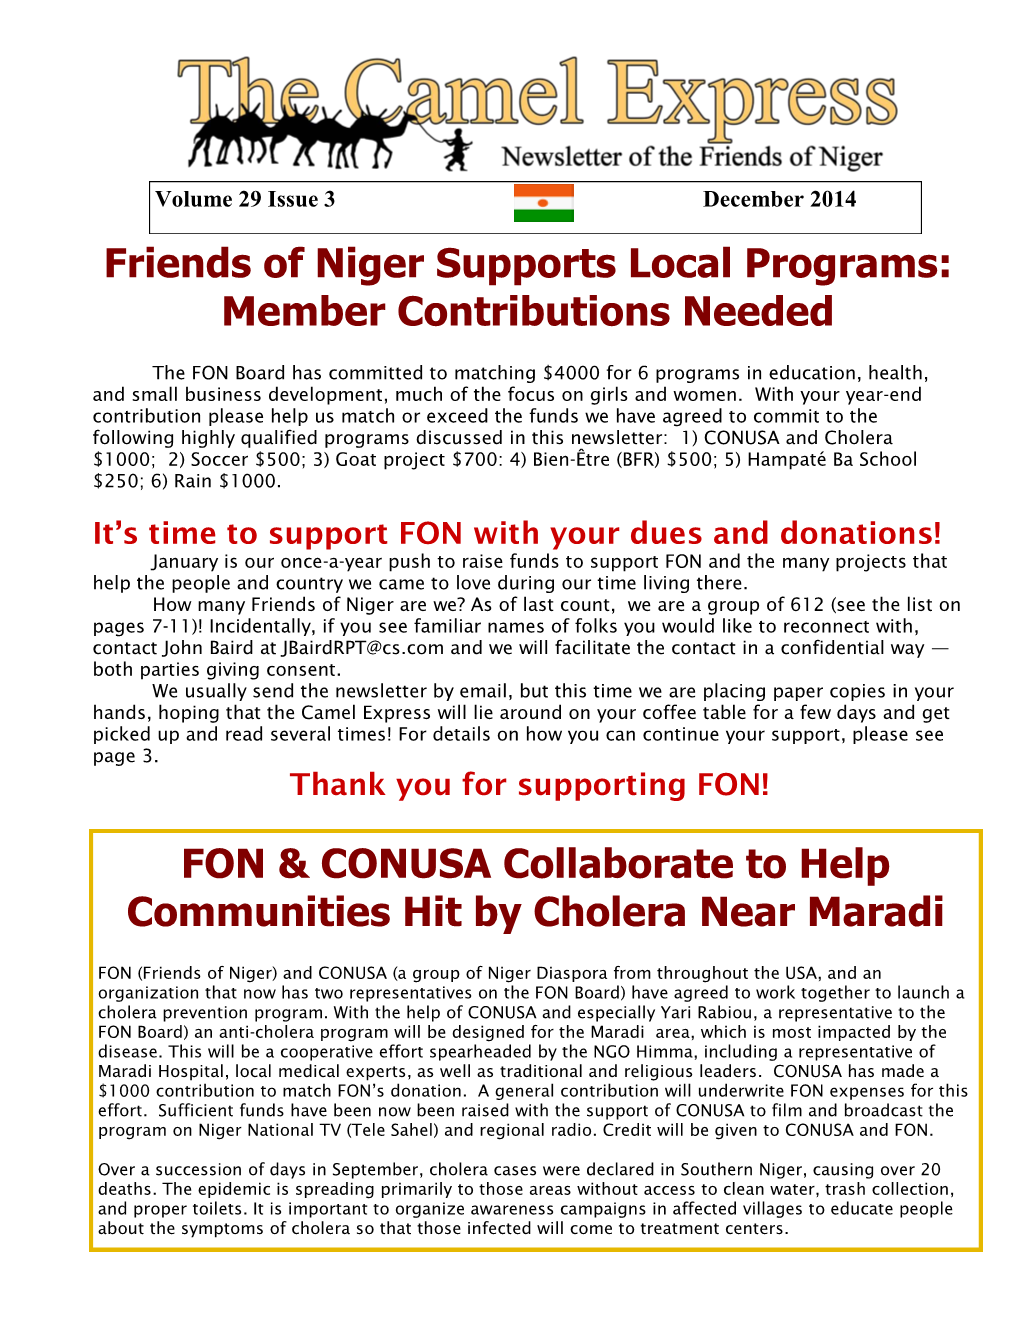 Friends of Niger Supports Local Programs: Member Contributions Needed FON & CONUSA Collaborate to Help Communities Hit by C